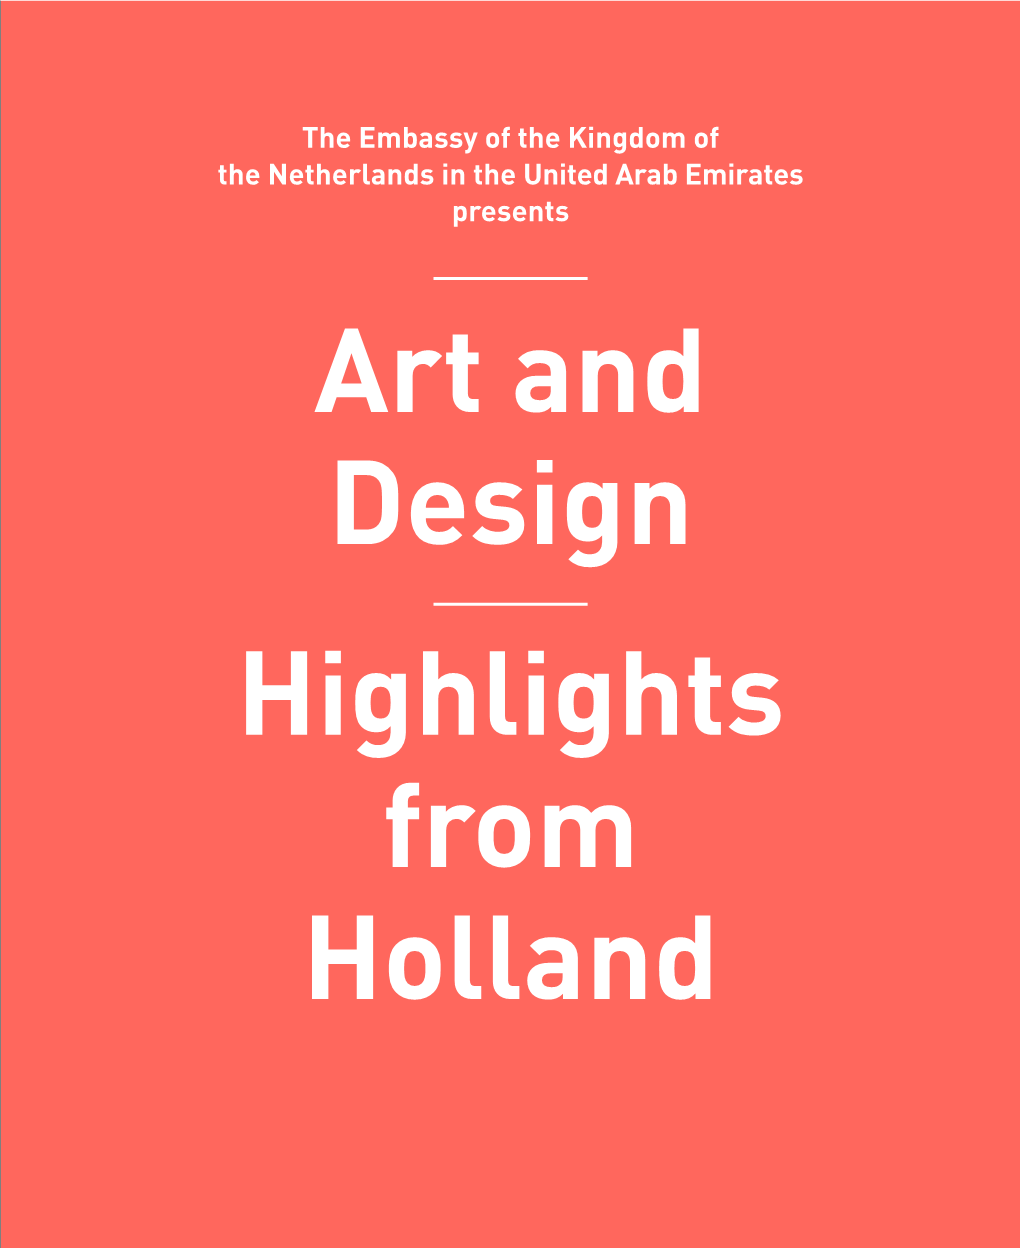 The Embassy of the Kingdom of the Netherlands in the United Arab Emirates Presents Art and Design Highlights from Holland Welkom!